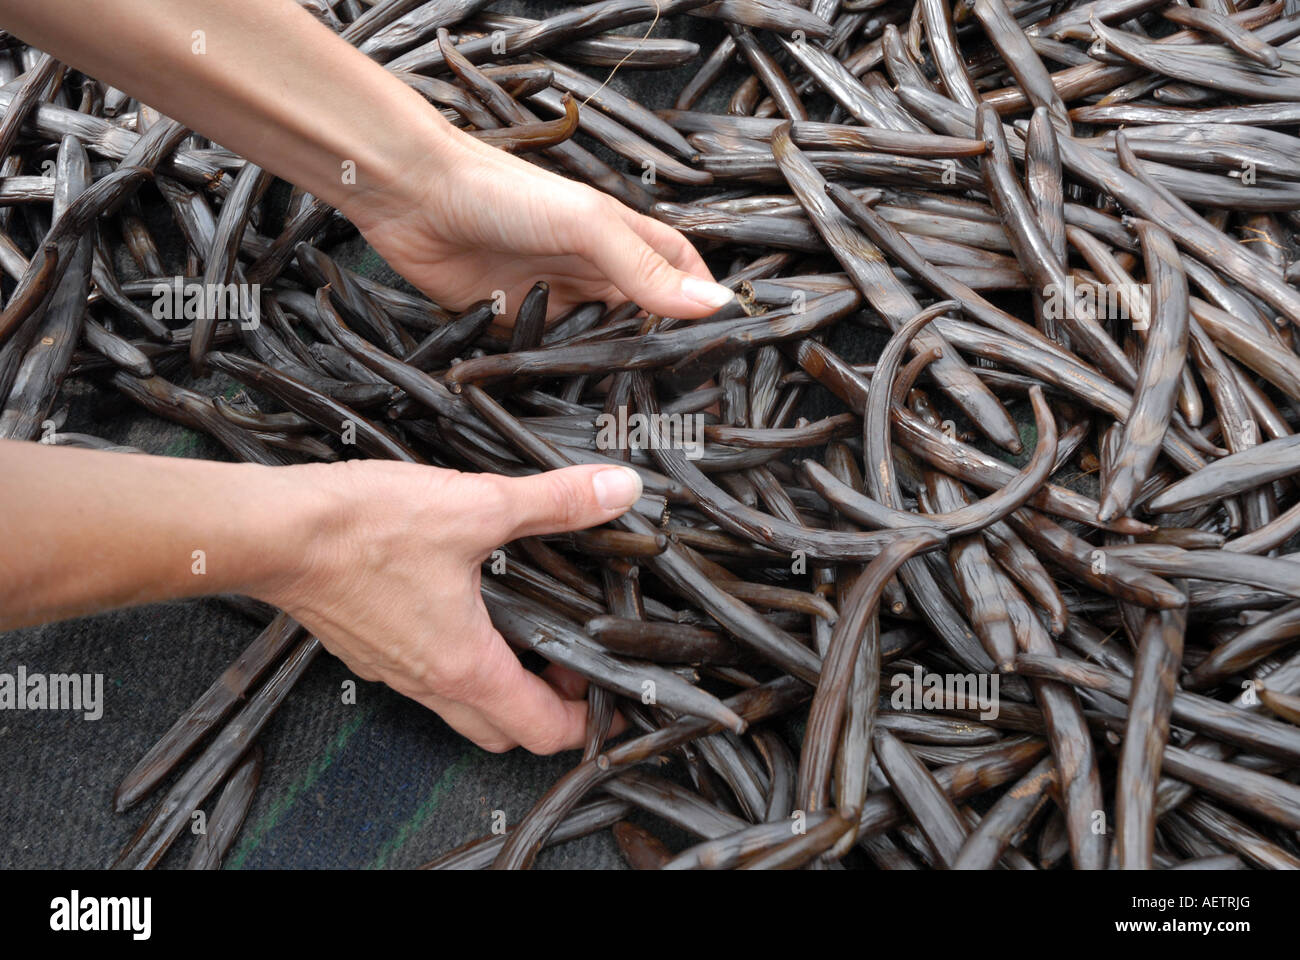 Hands grasping vanilla pods from a mound Stock Photo